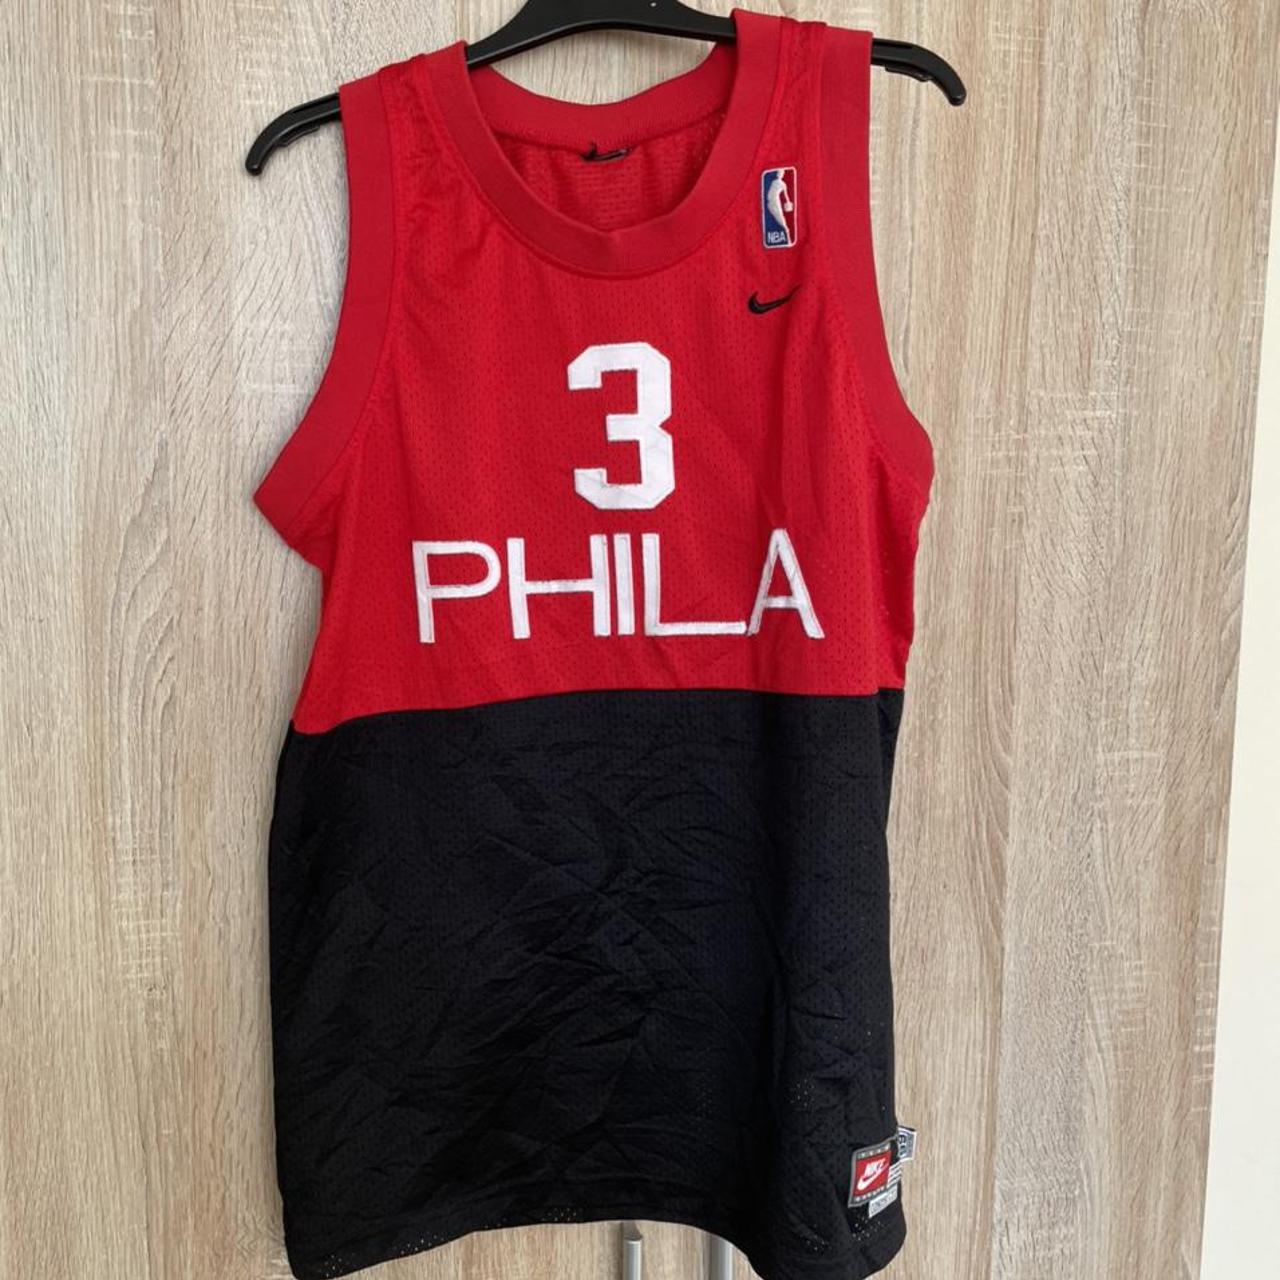 red and black iverson jersey